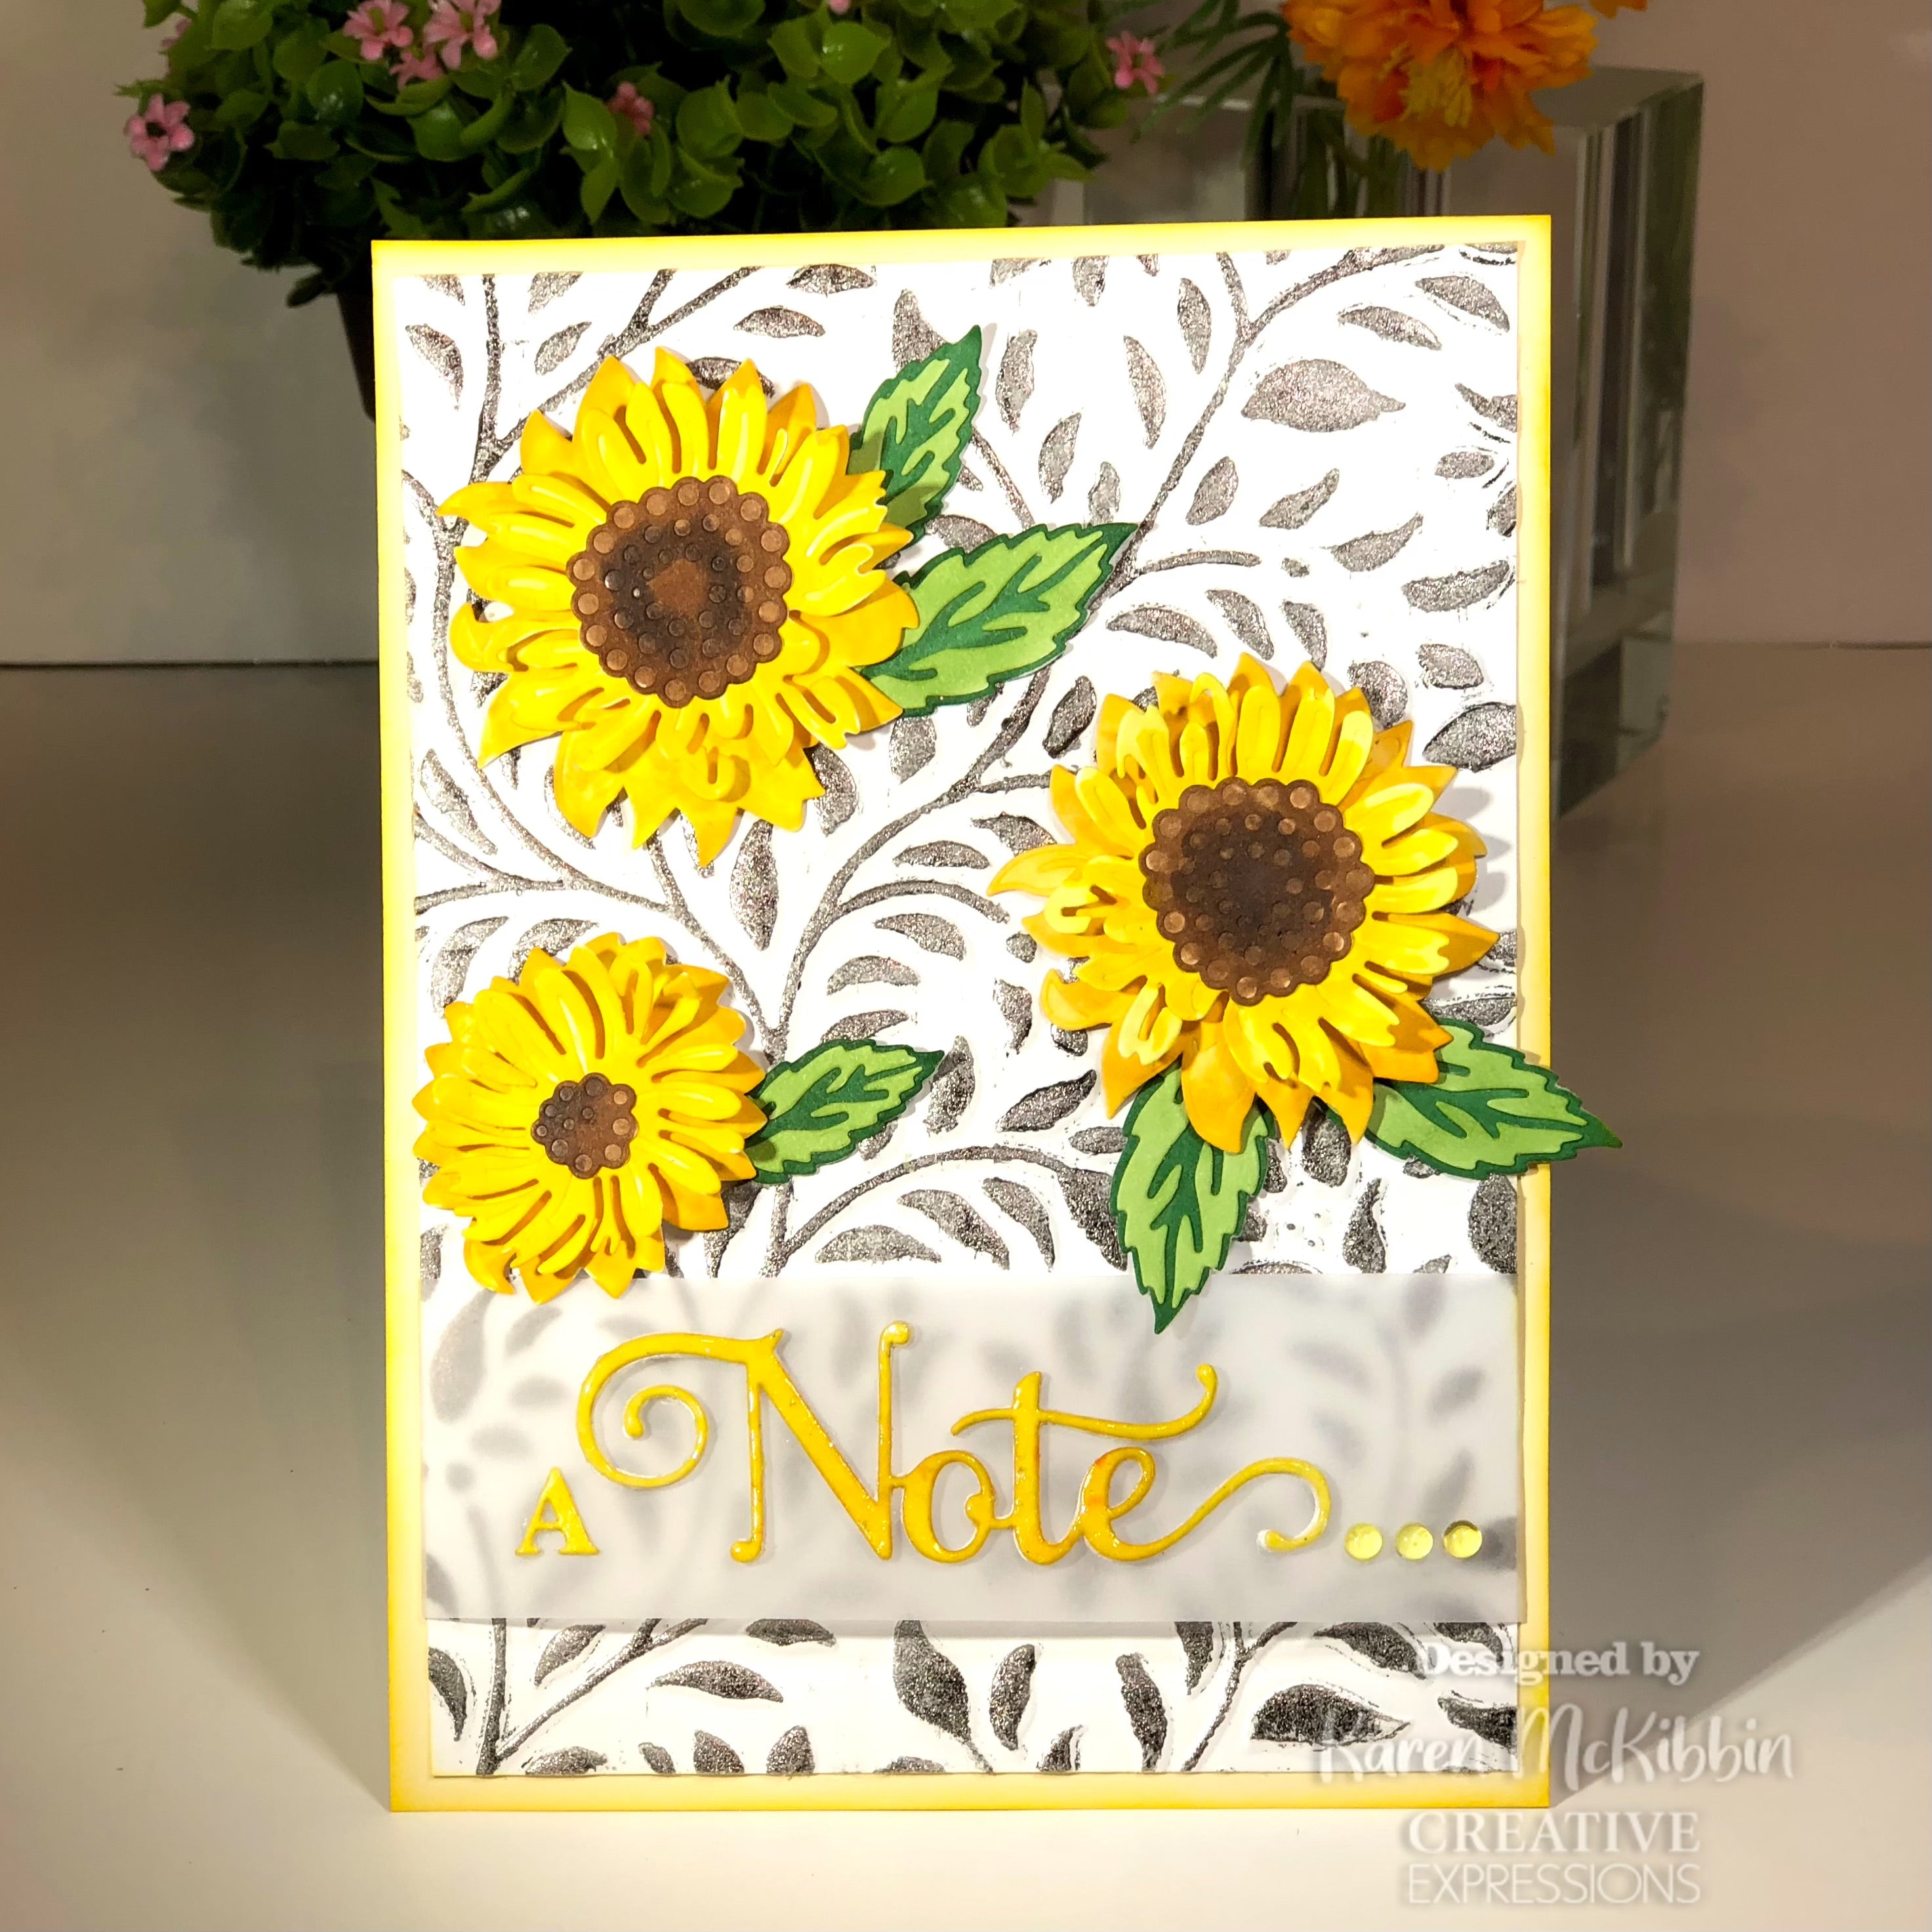 Creative Expressions Sue Wilson Noble Shadowed Sentiment Just A Note Craft Die